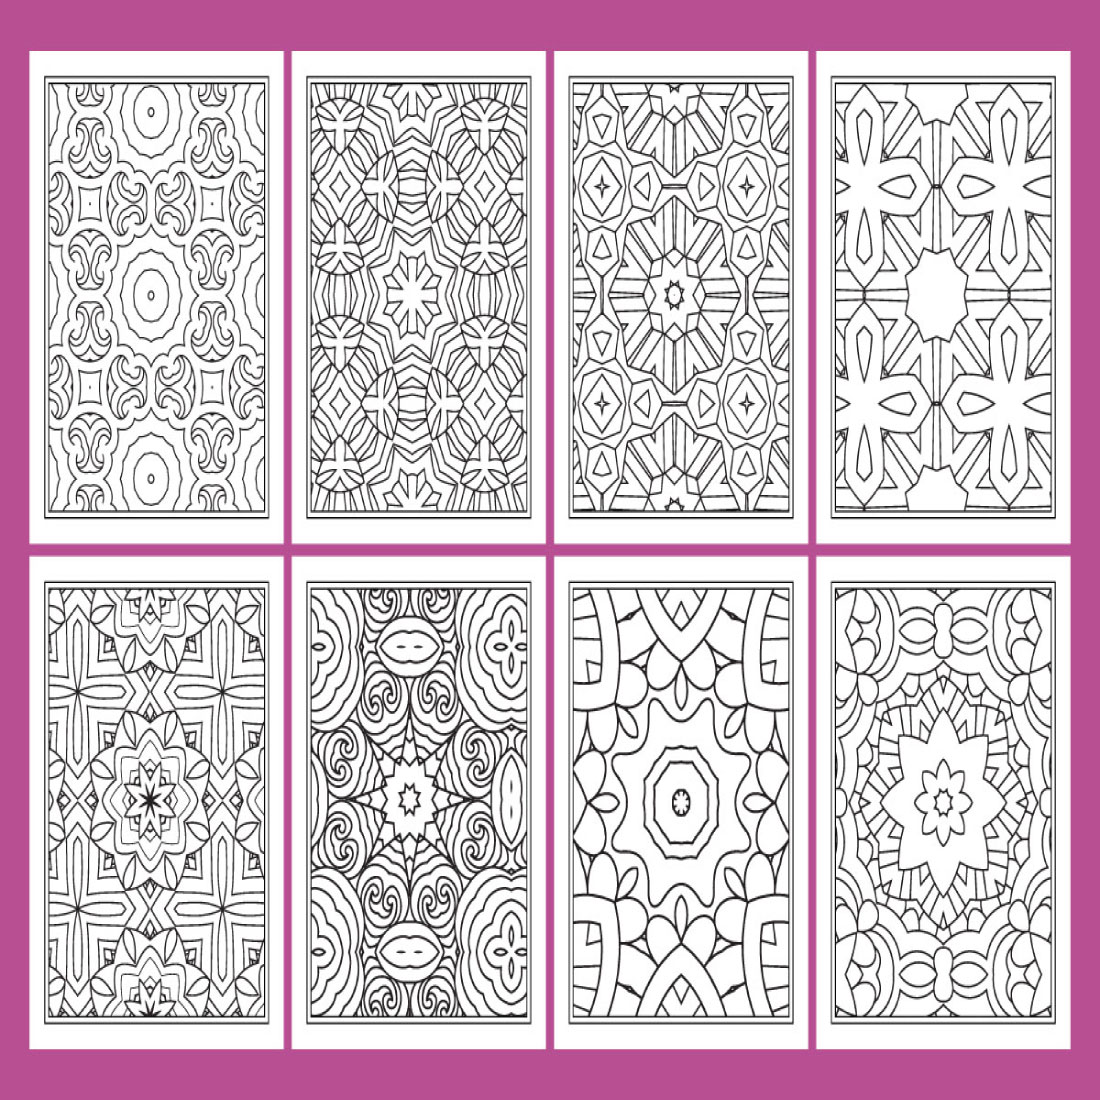 300+ Abstract Mandala Coloring Pages cover image.